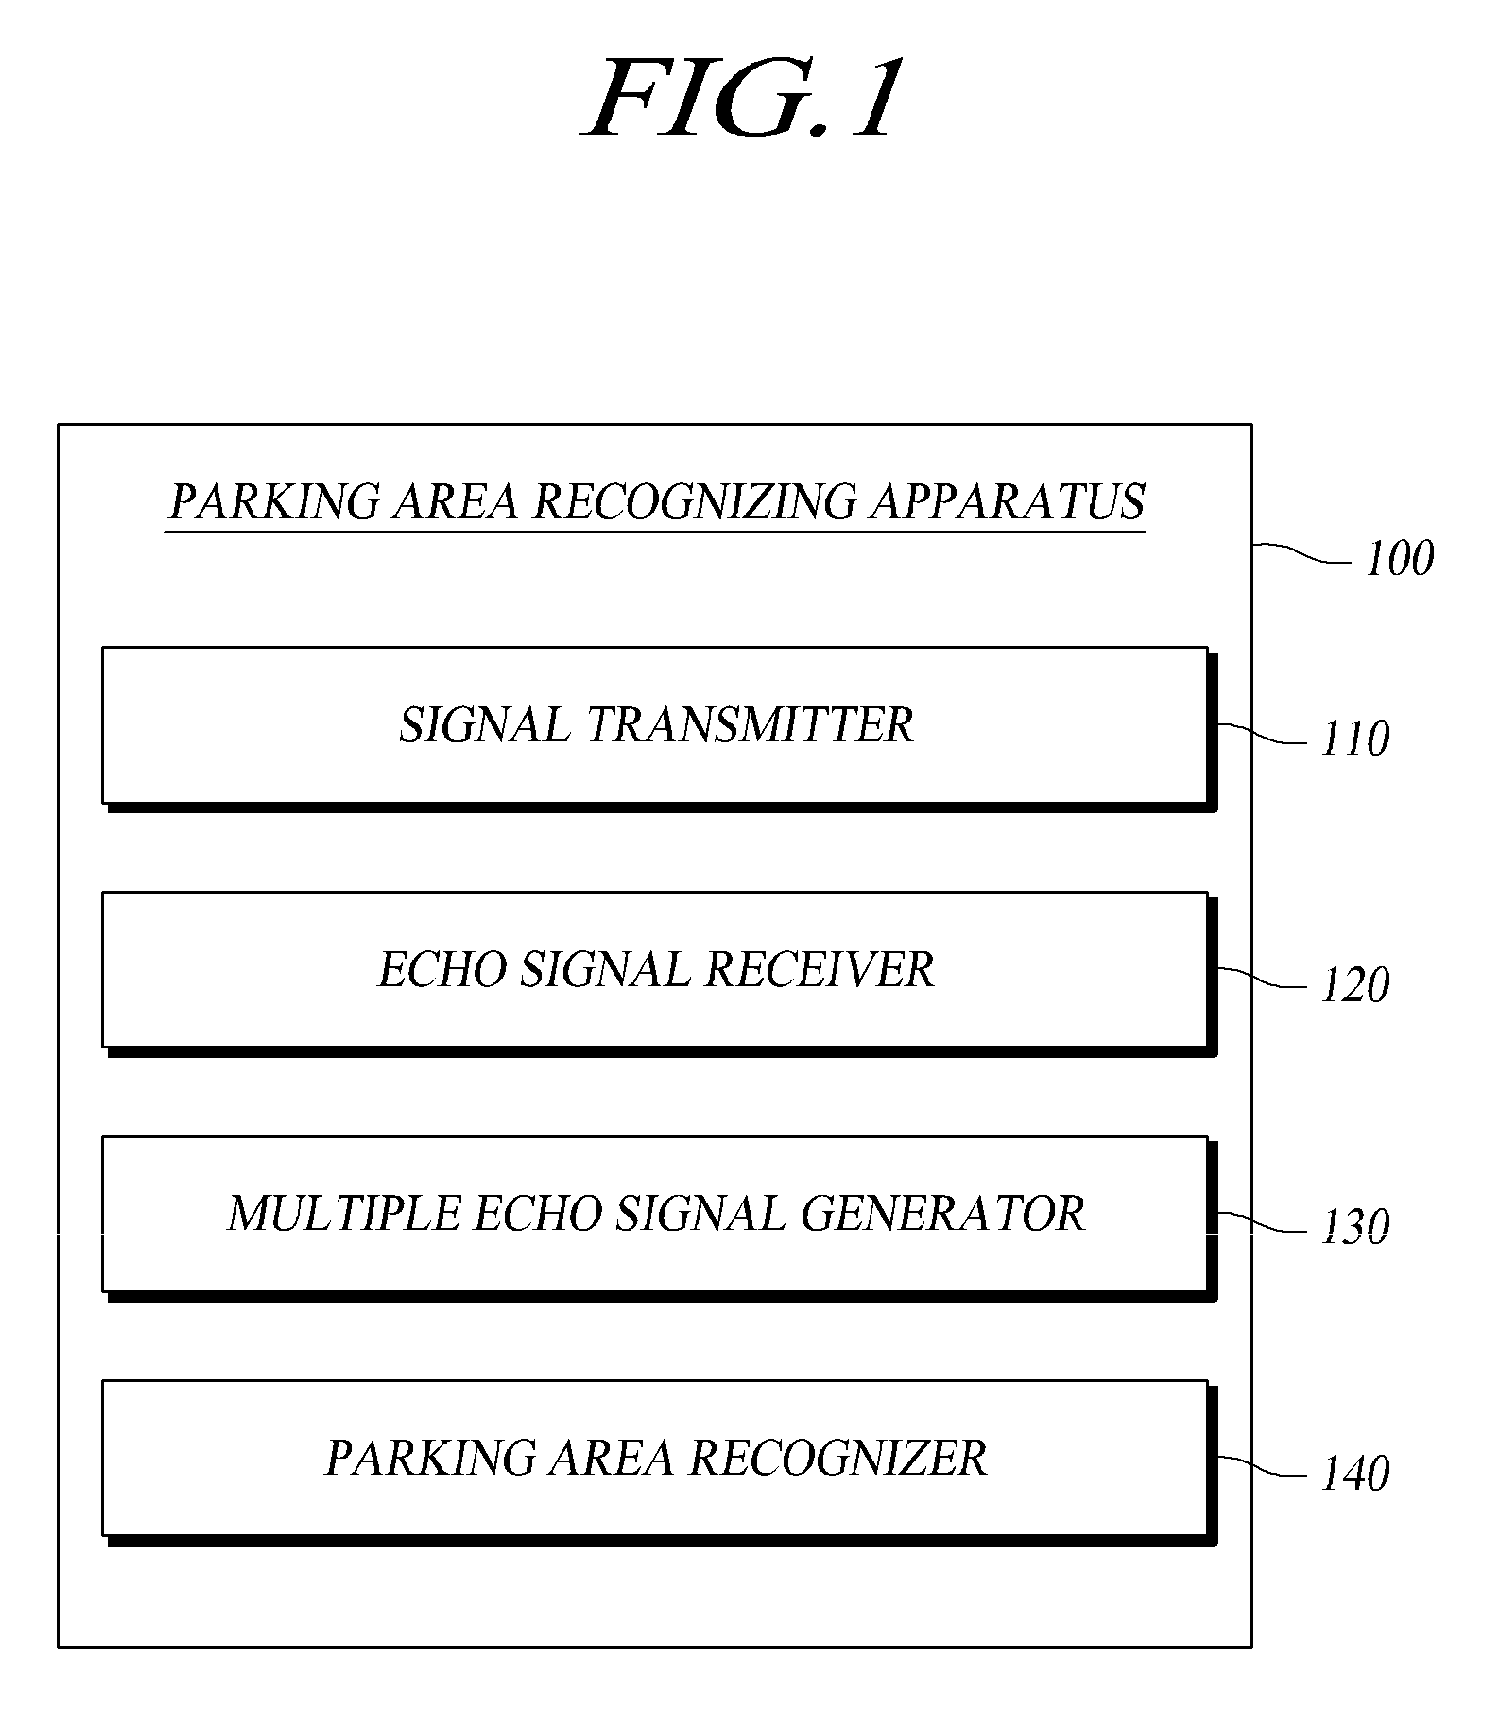 Method and apparatus for recognizing parking area